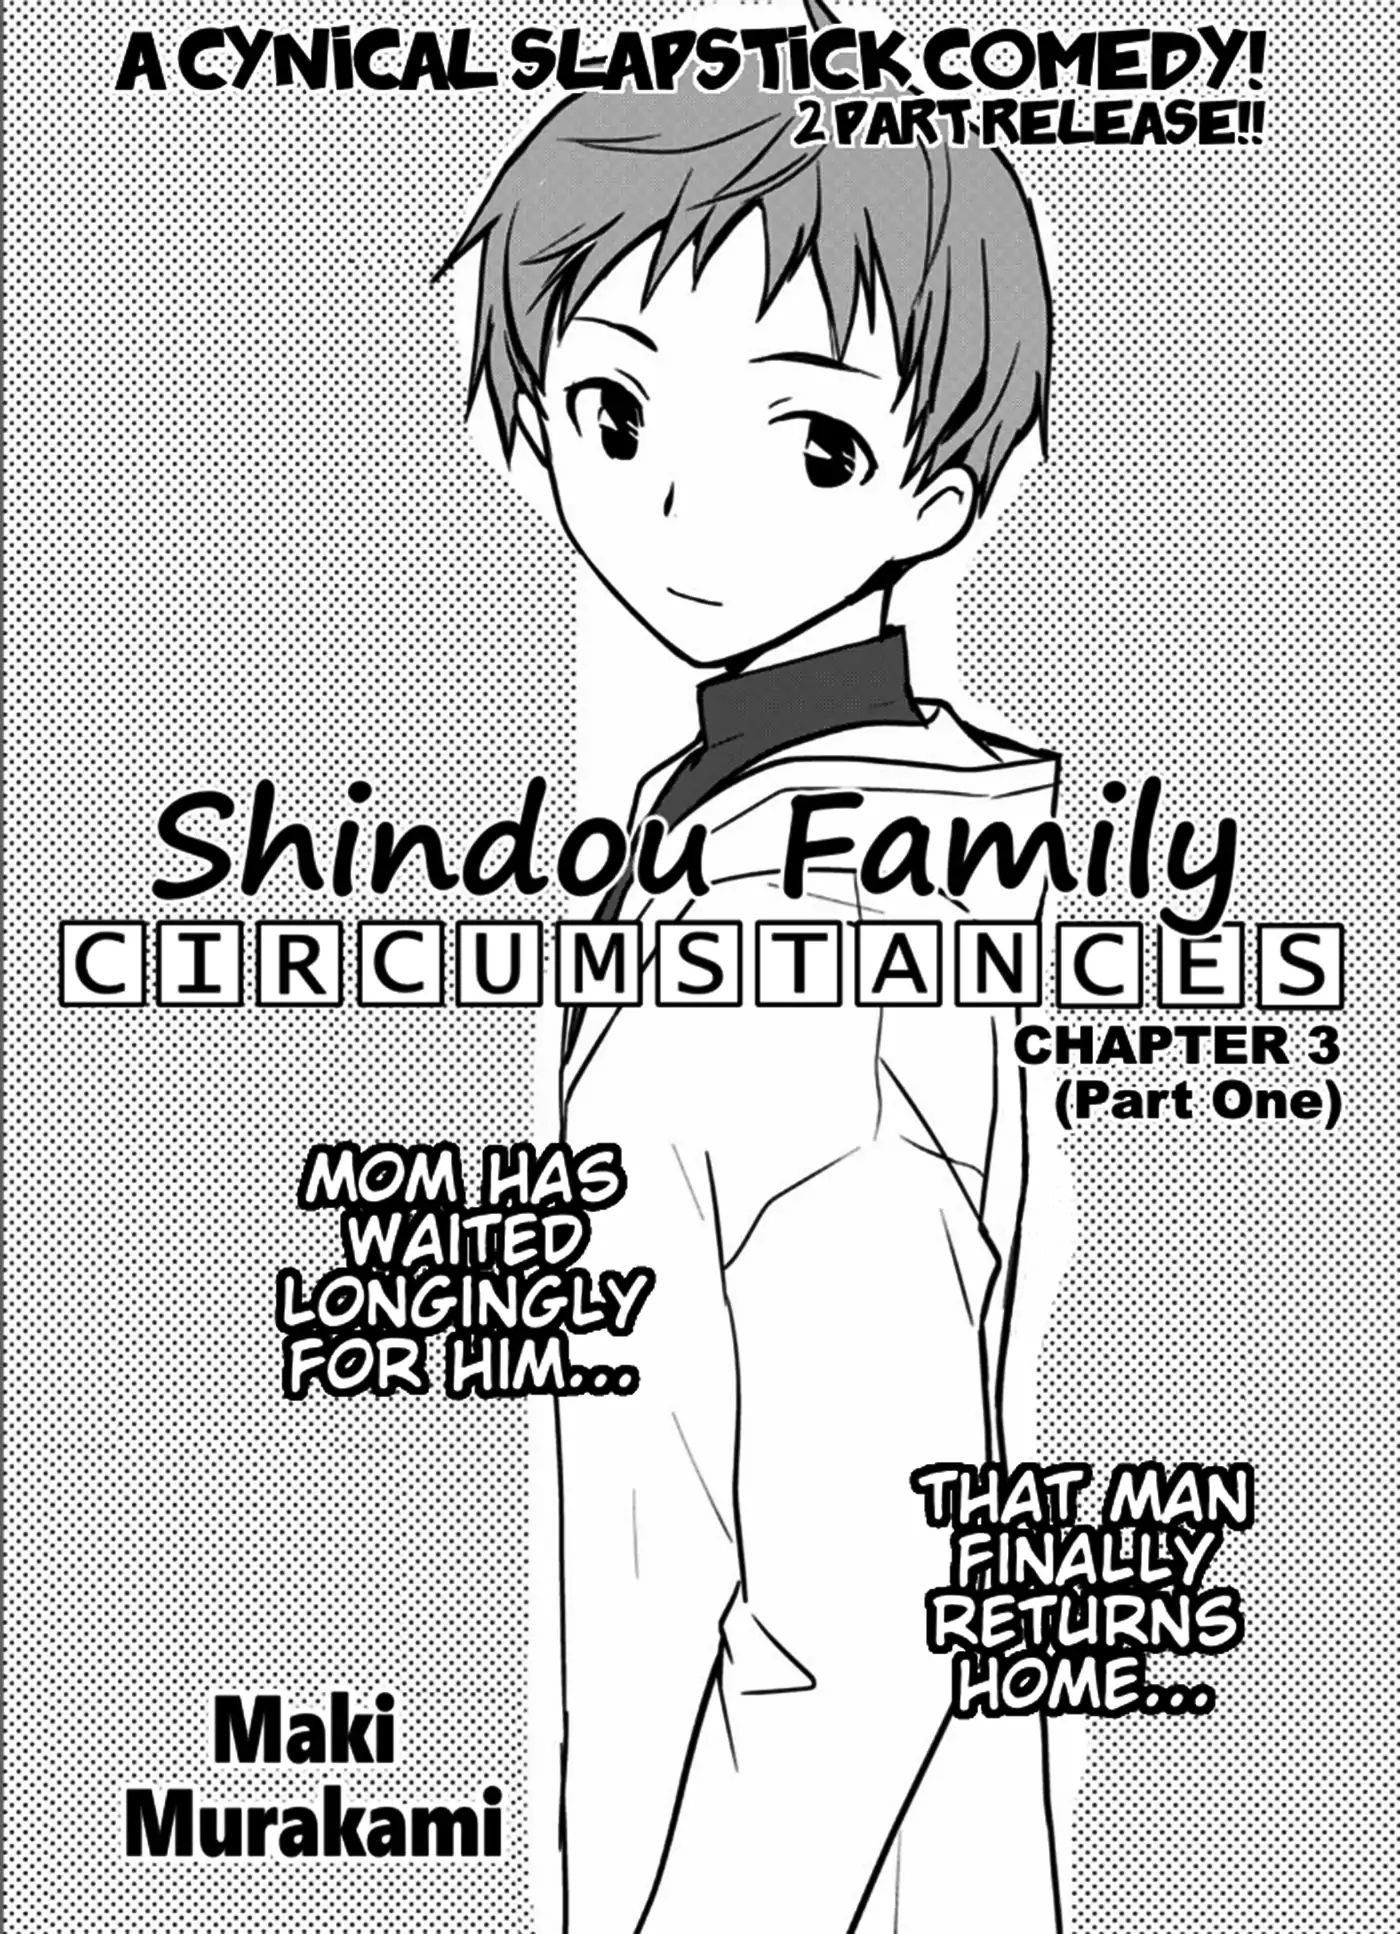 Shindou Family Circumstances - Page 1